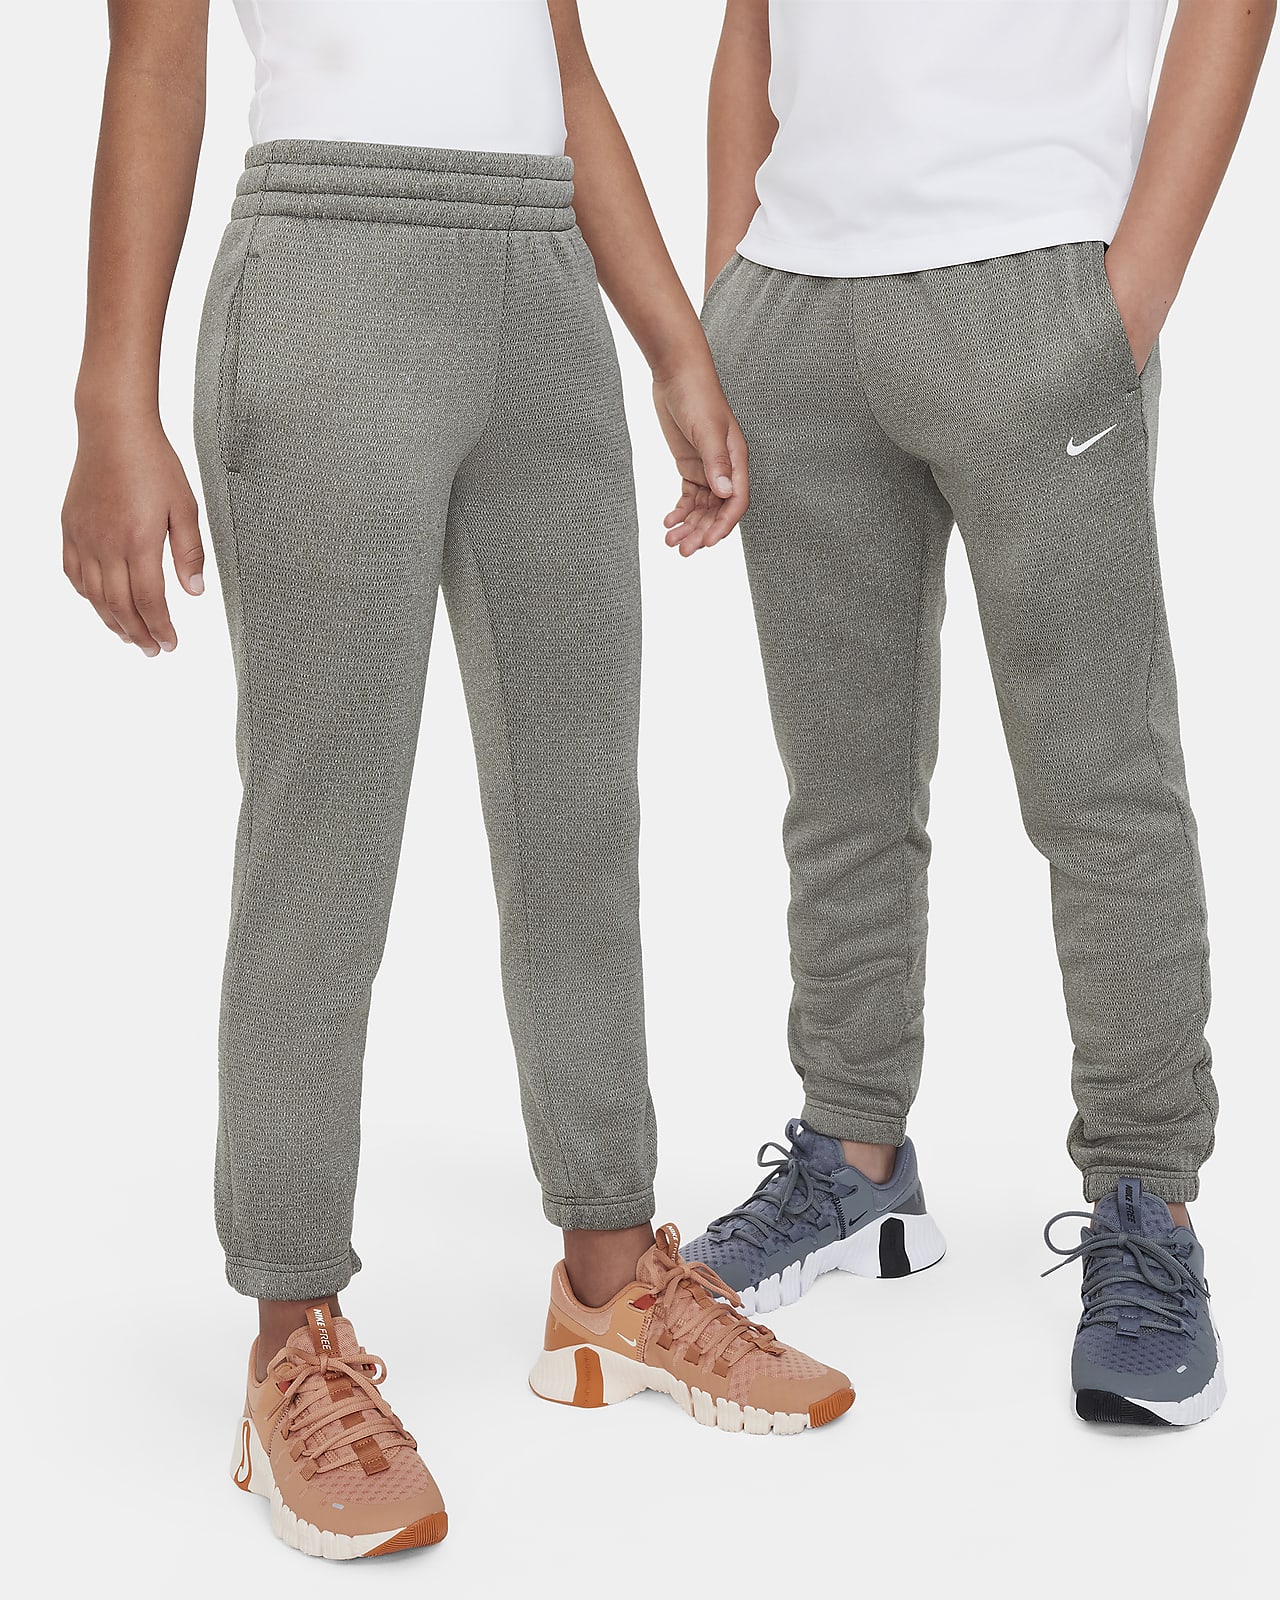 Nike Womens Therma Fit French Terry Fleece Pants - Grey